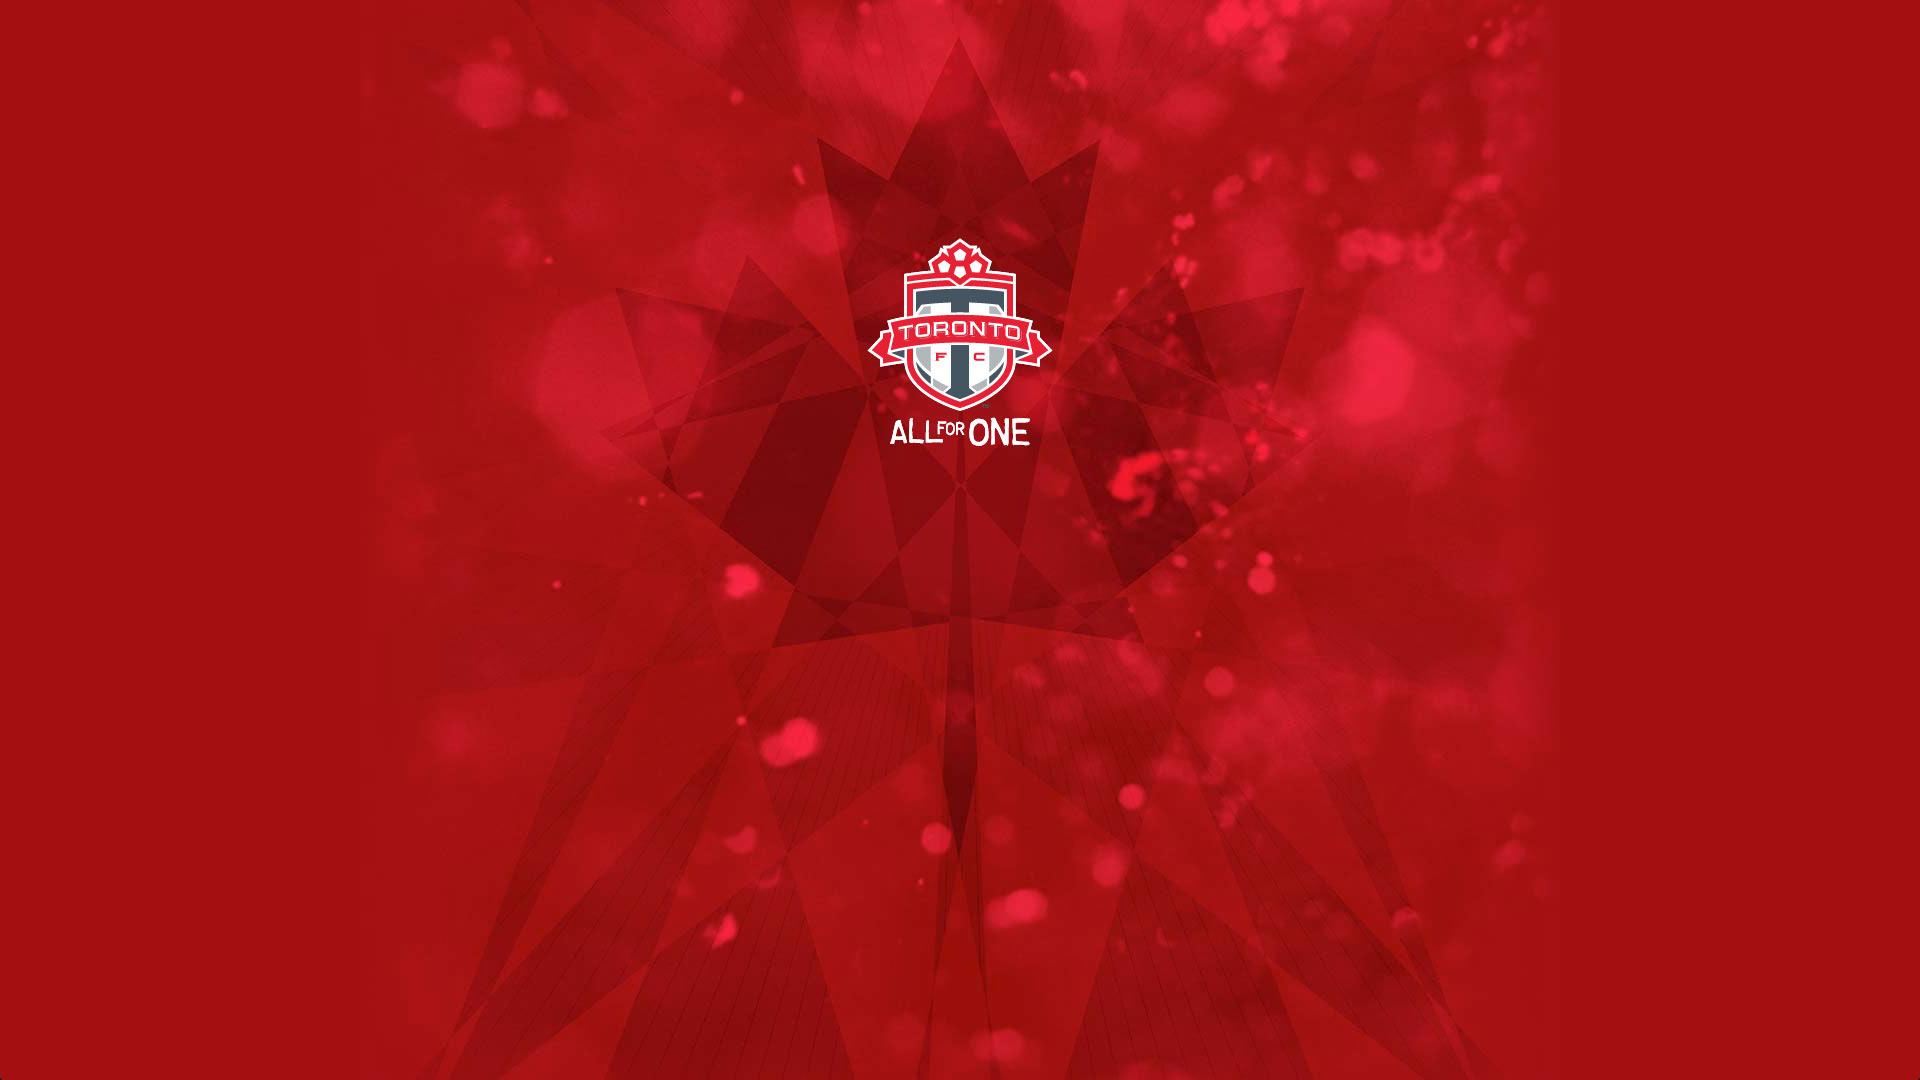 TFC All for One Wallpaper (HD: 1920x1080)